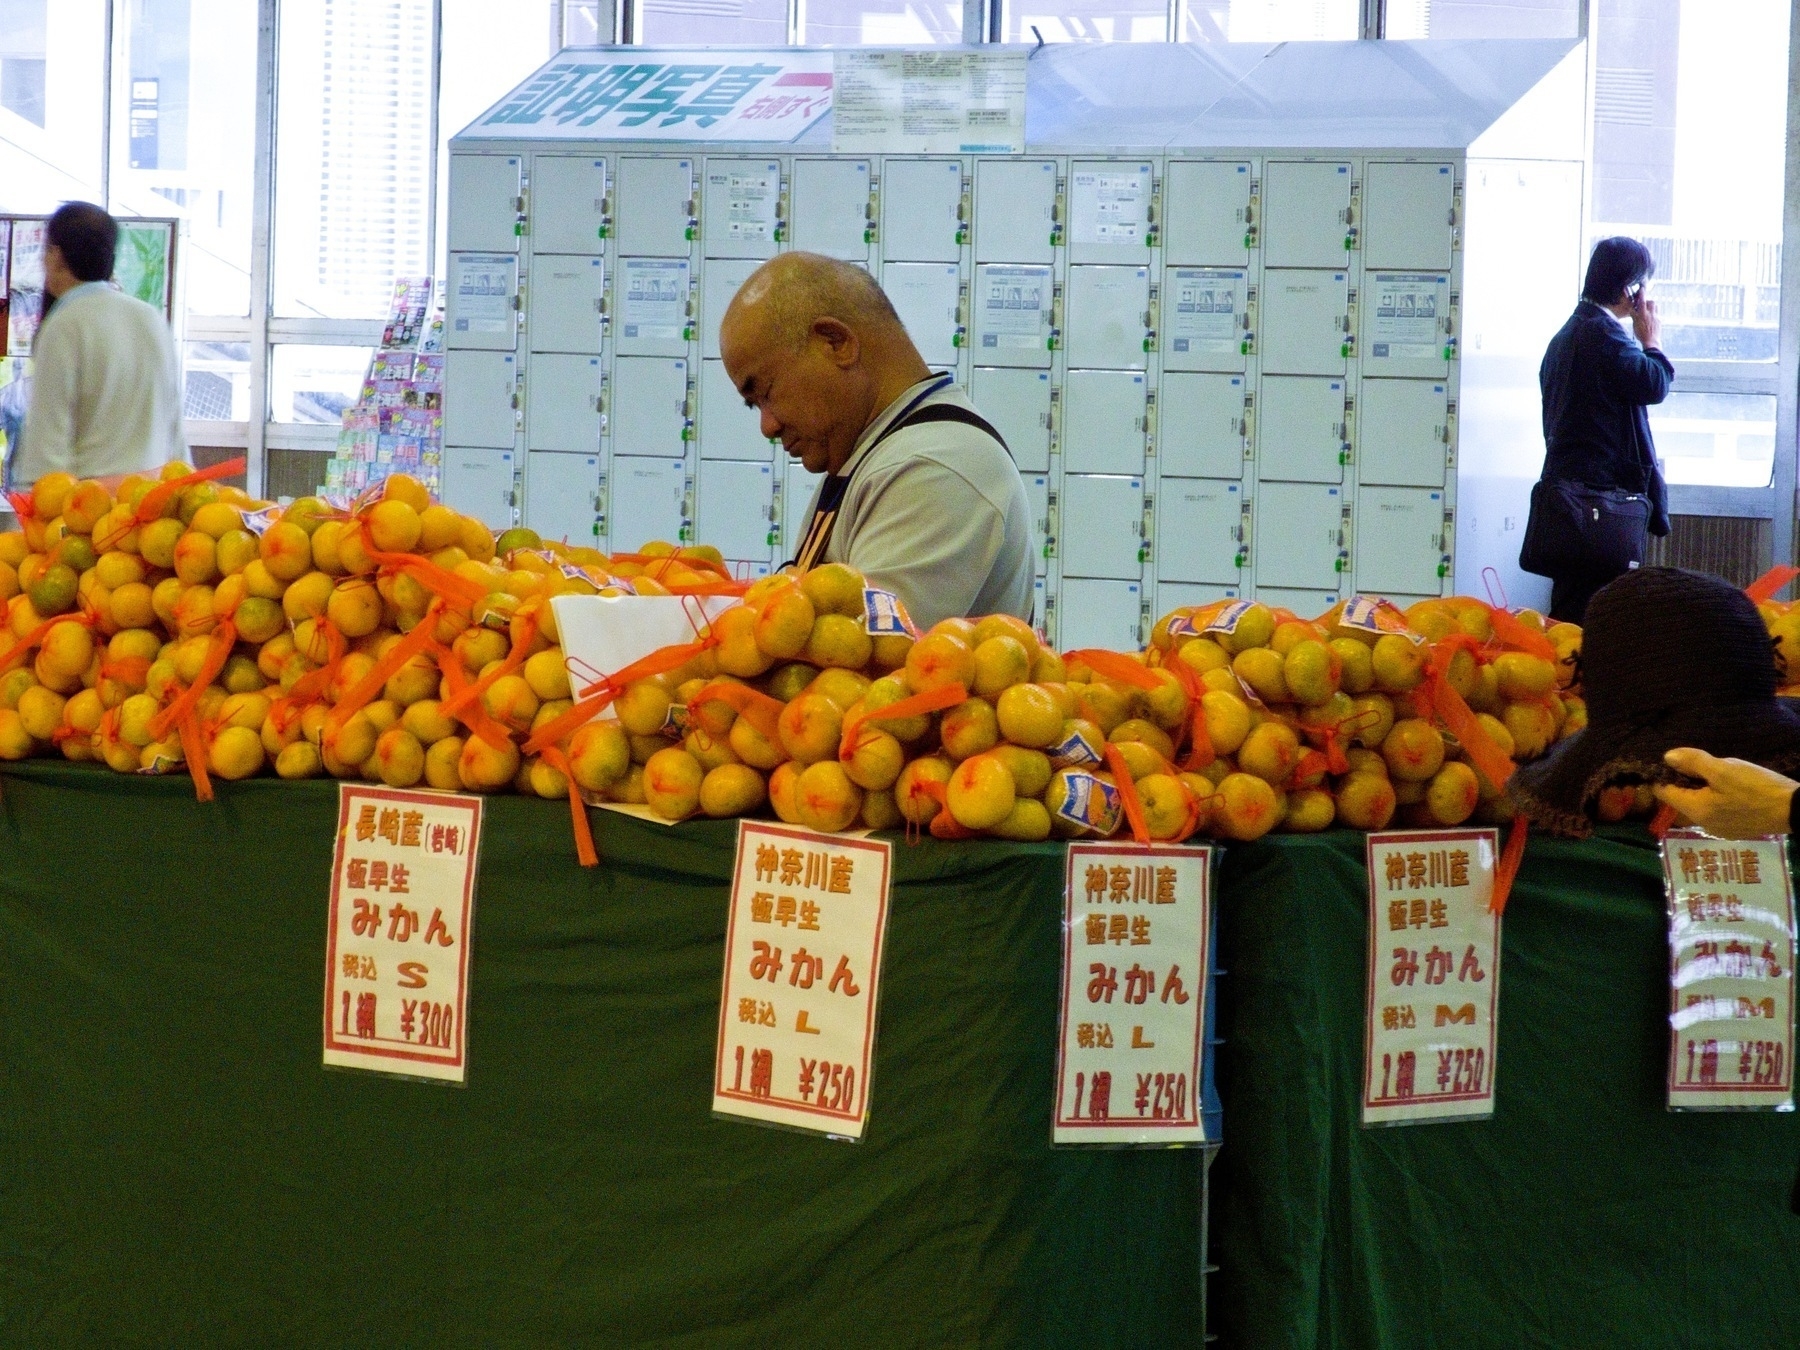 Mikan orange seller asleep at his stall in front of a locker bank at a train station in Japan. 